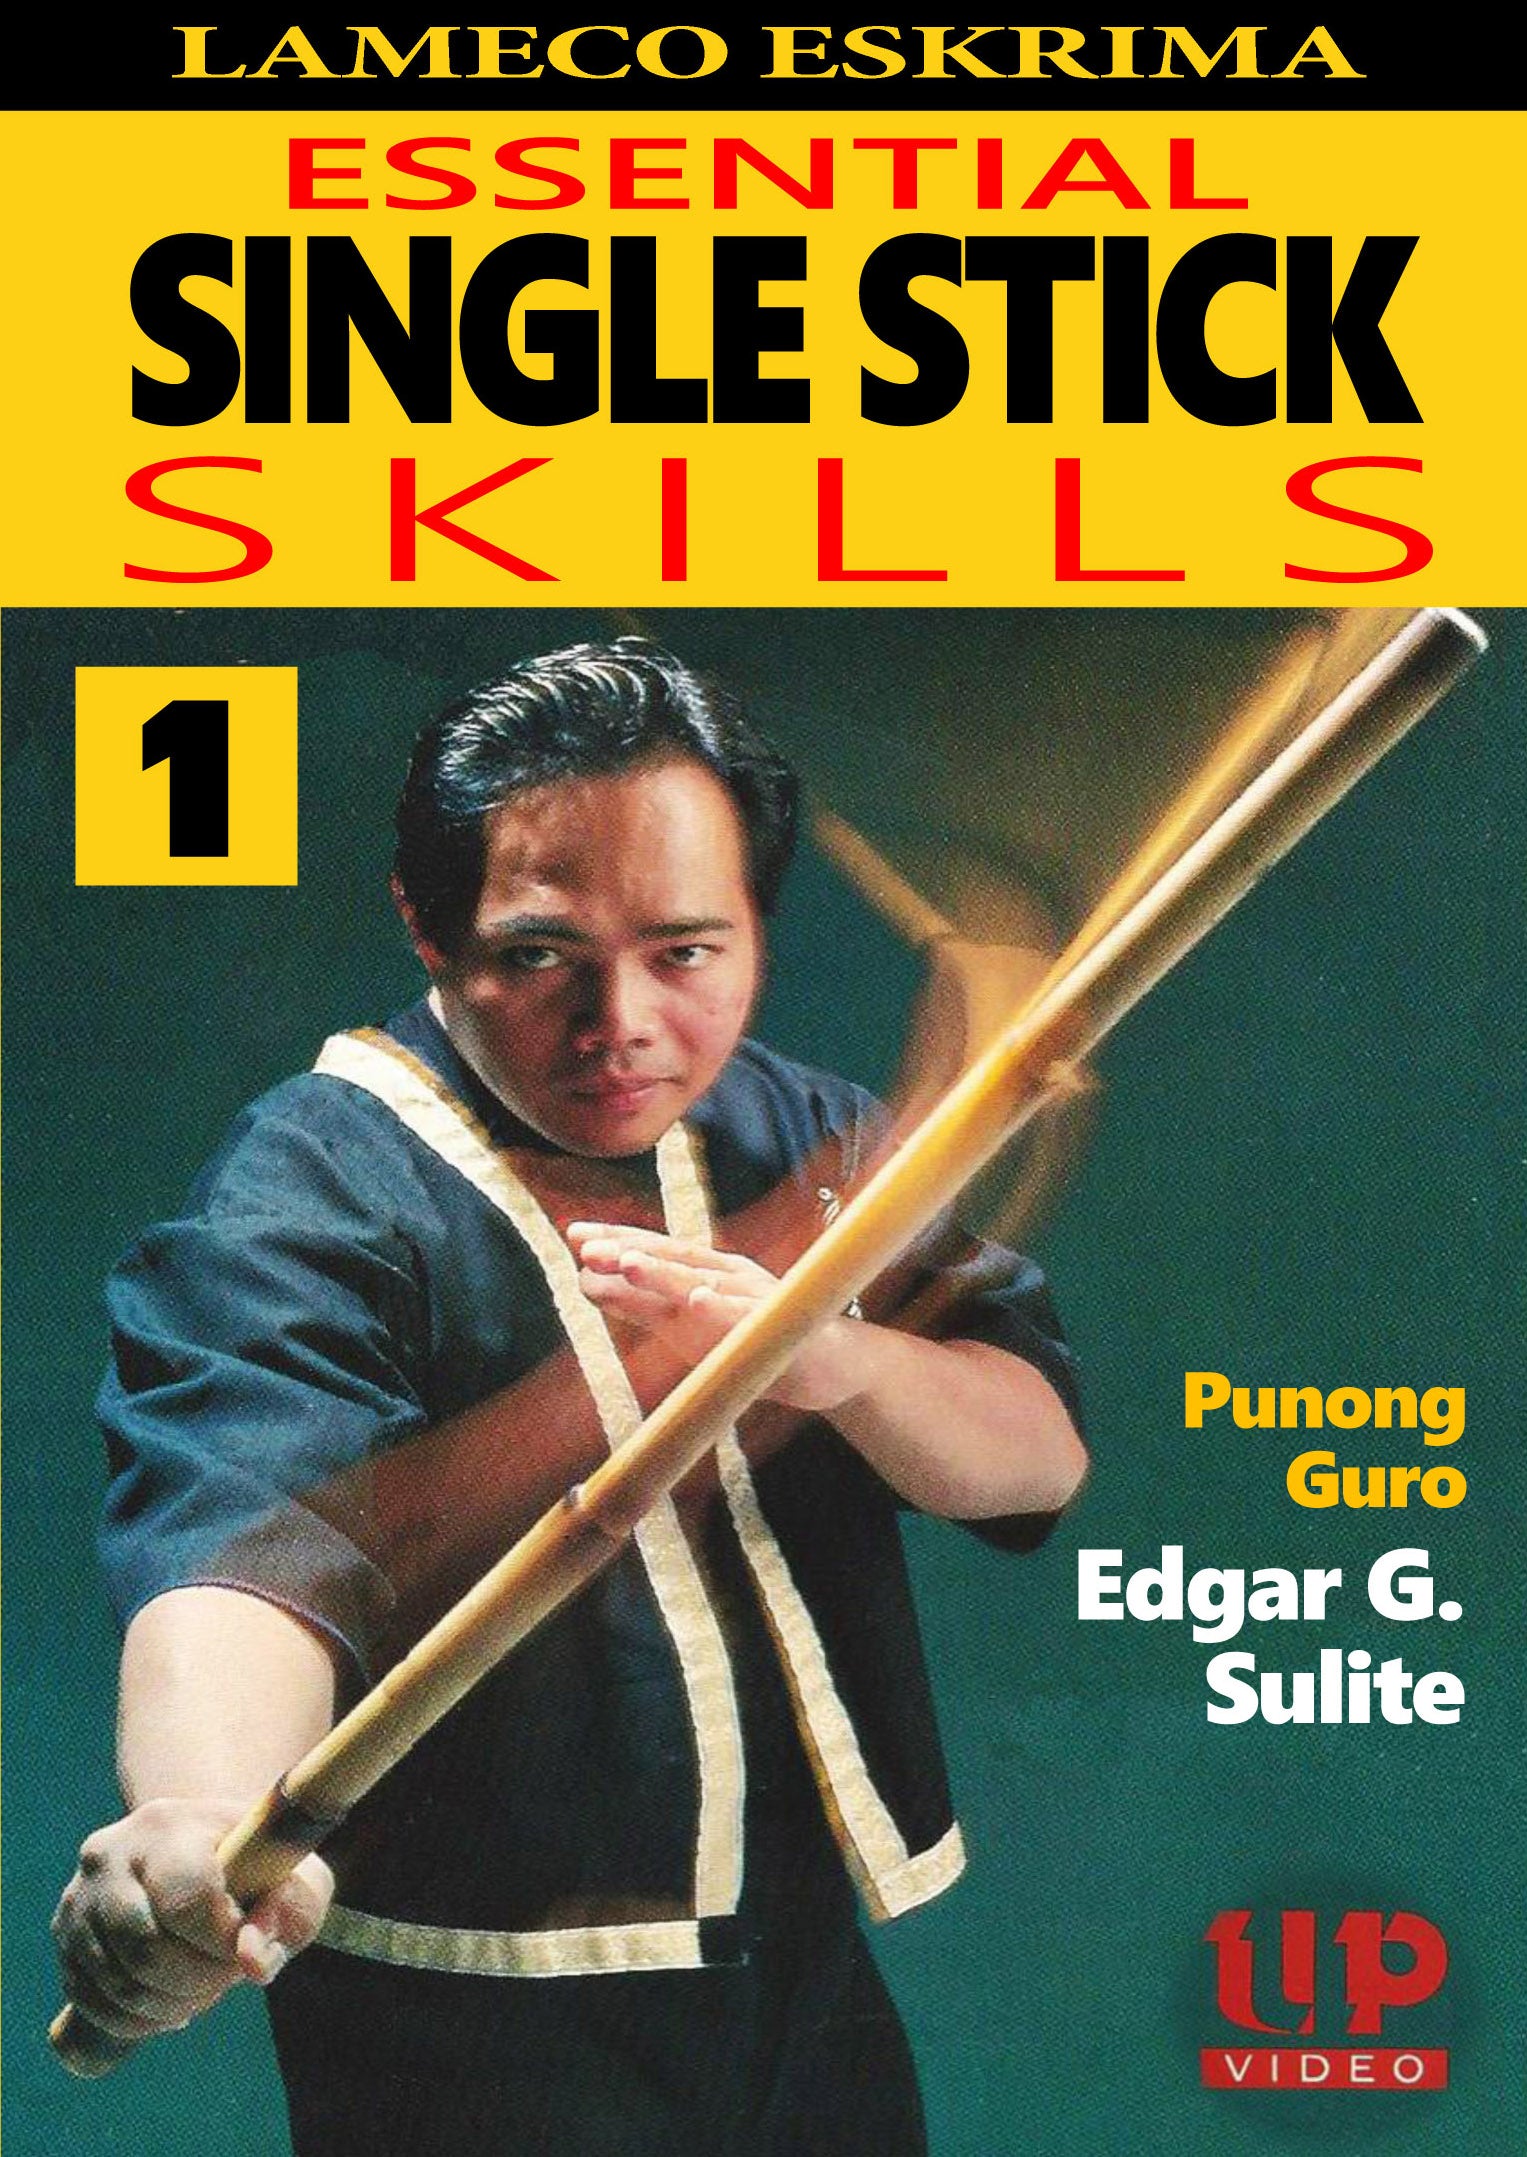 Combat Rattan Escrima Kali Arnis Stick + VIDEO Set - Learn From a Master!